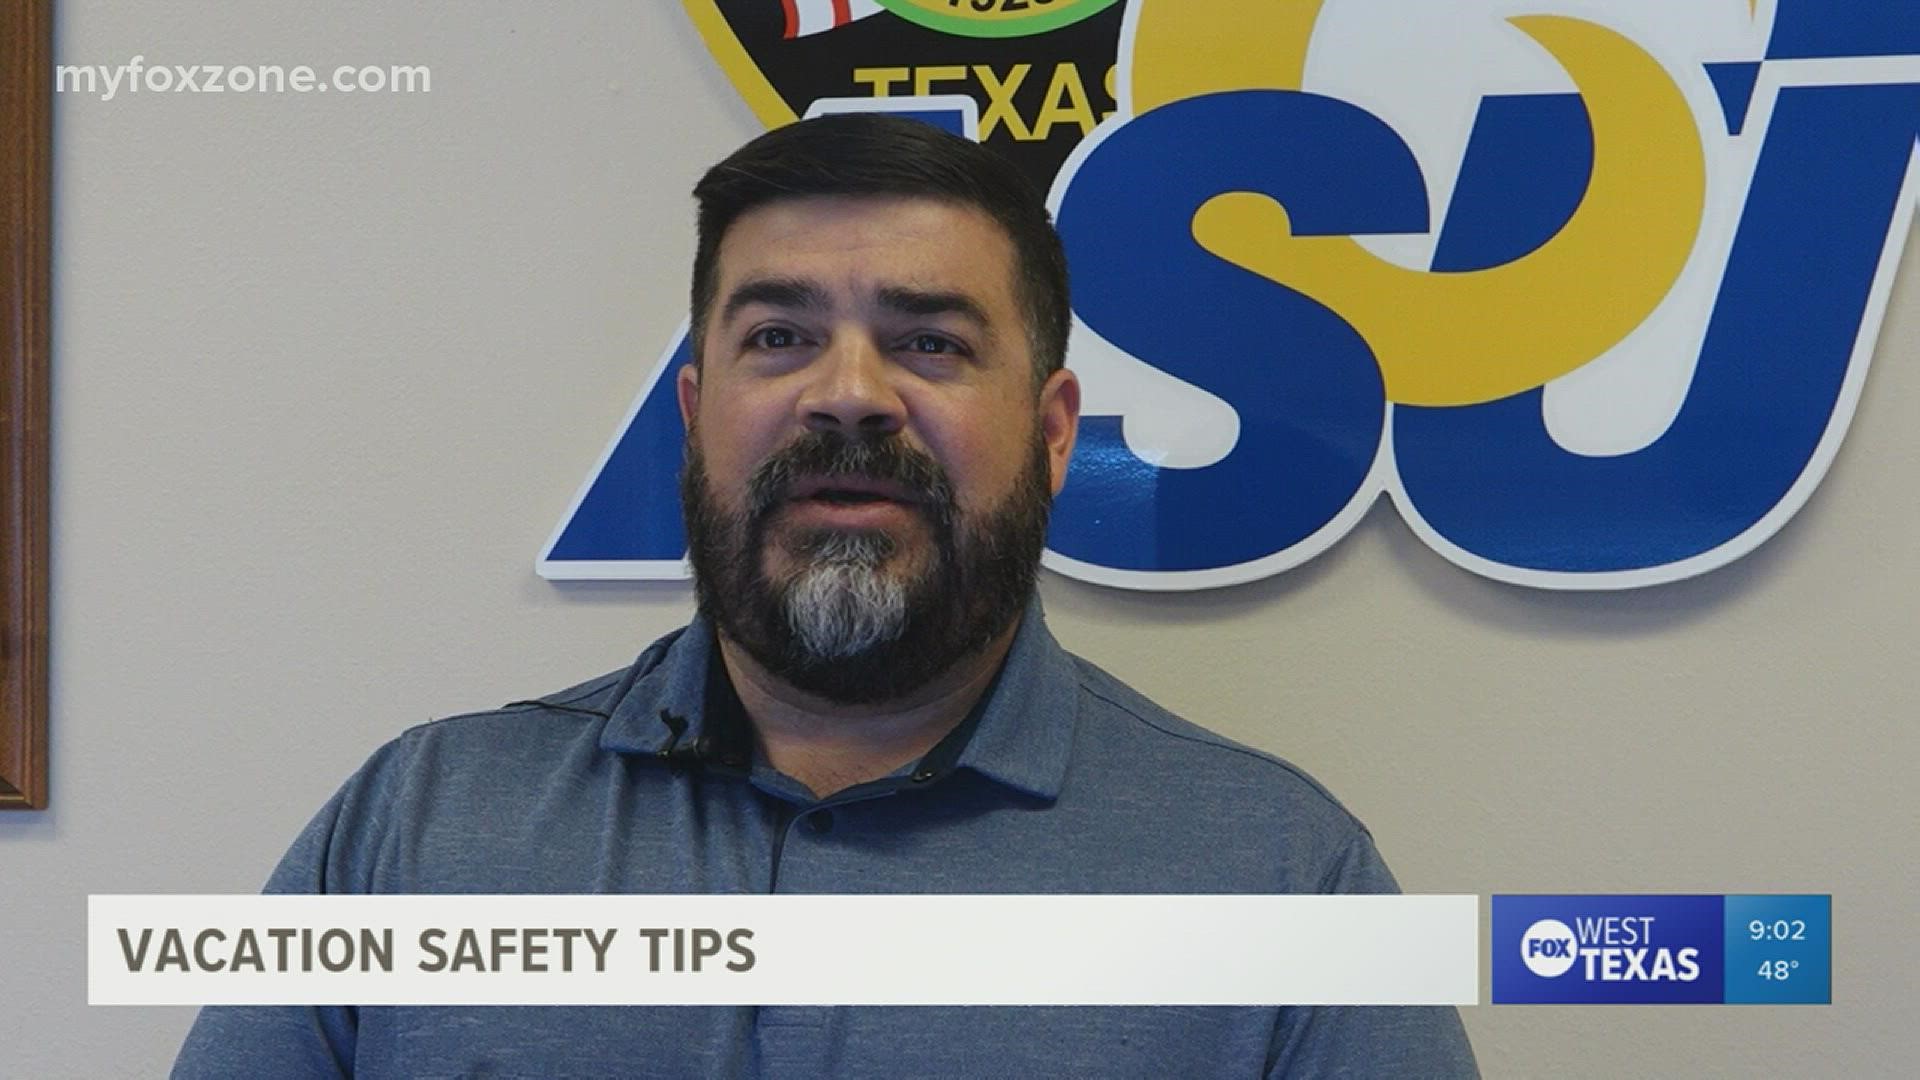 Local law enforcement recommends taking safety precautions to keep yourself and your home safe while on vacation.